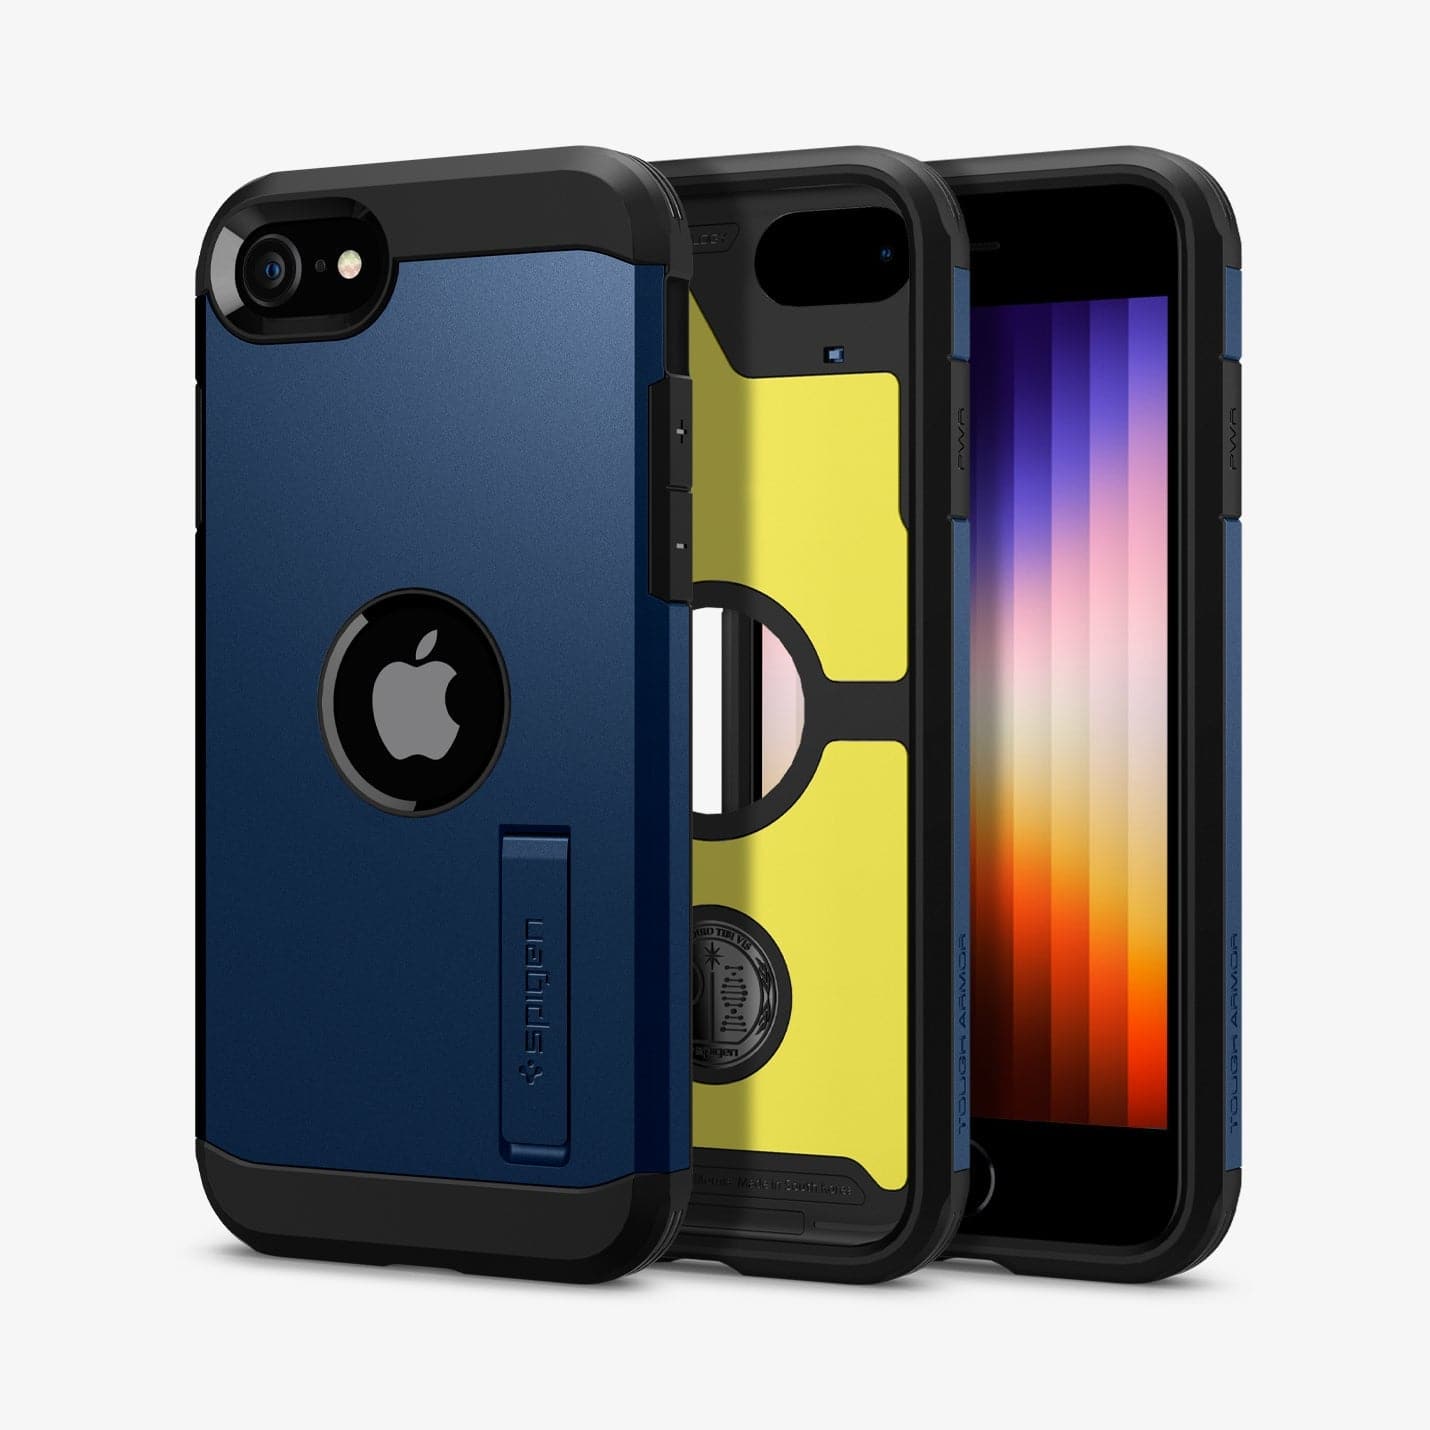 ACS04347 - iPhone 7 Series Tough Armor Case in Navy Blue showing 3 paralleled cases, one showing front, two showing inner layer and back